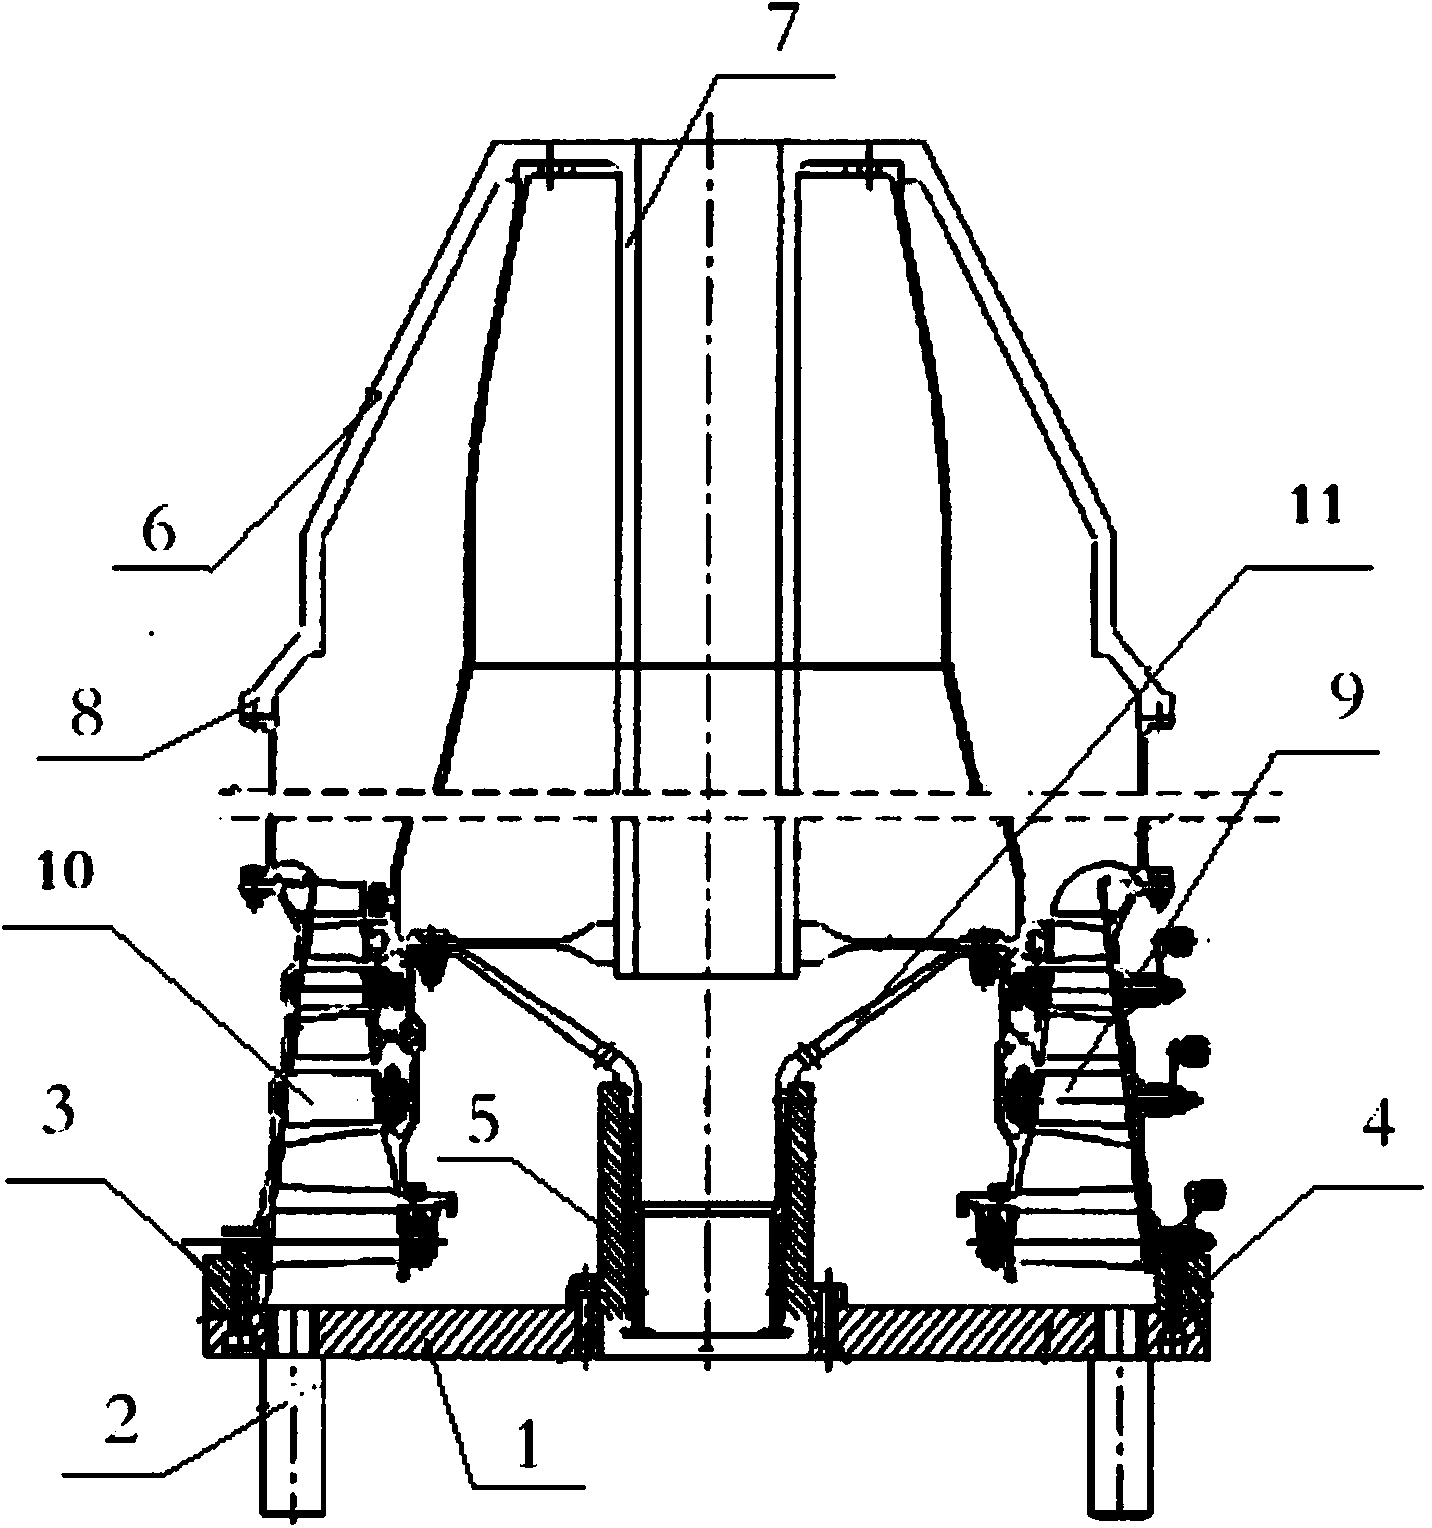 Axial-flow compressor unit body component assembling device and method